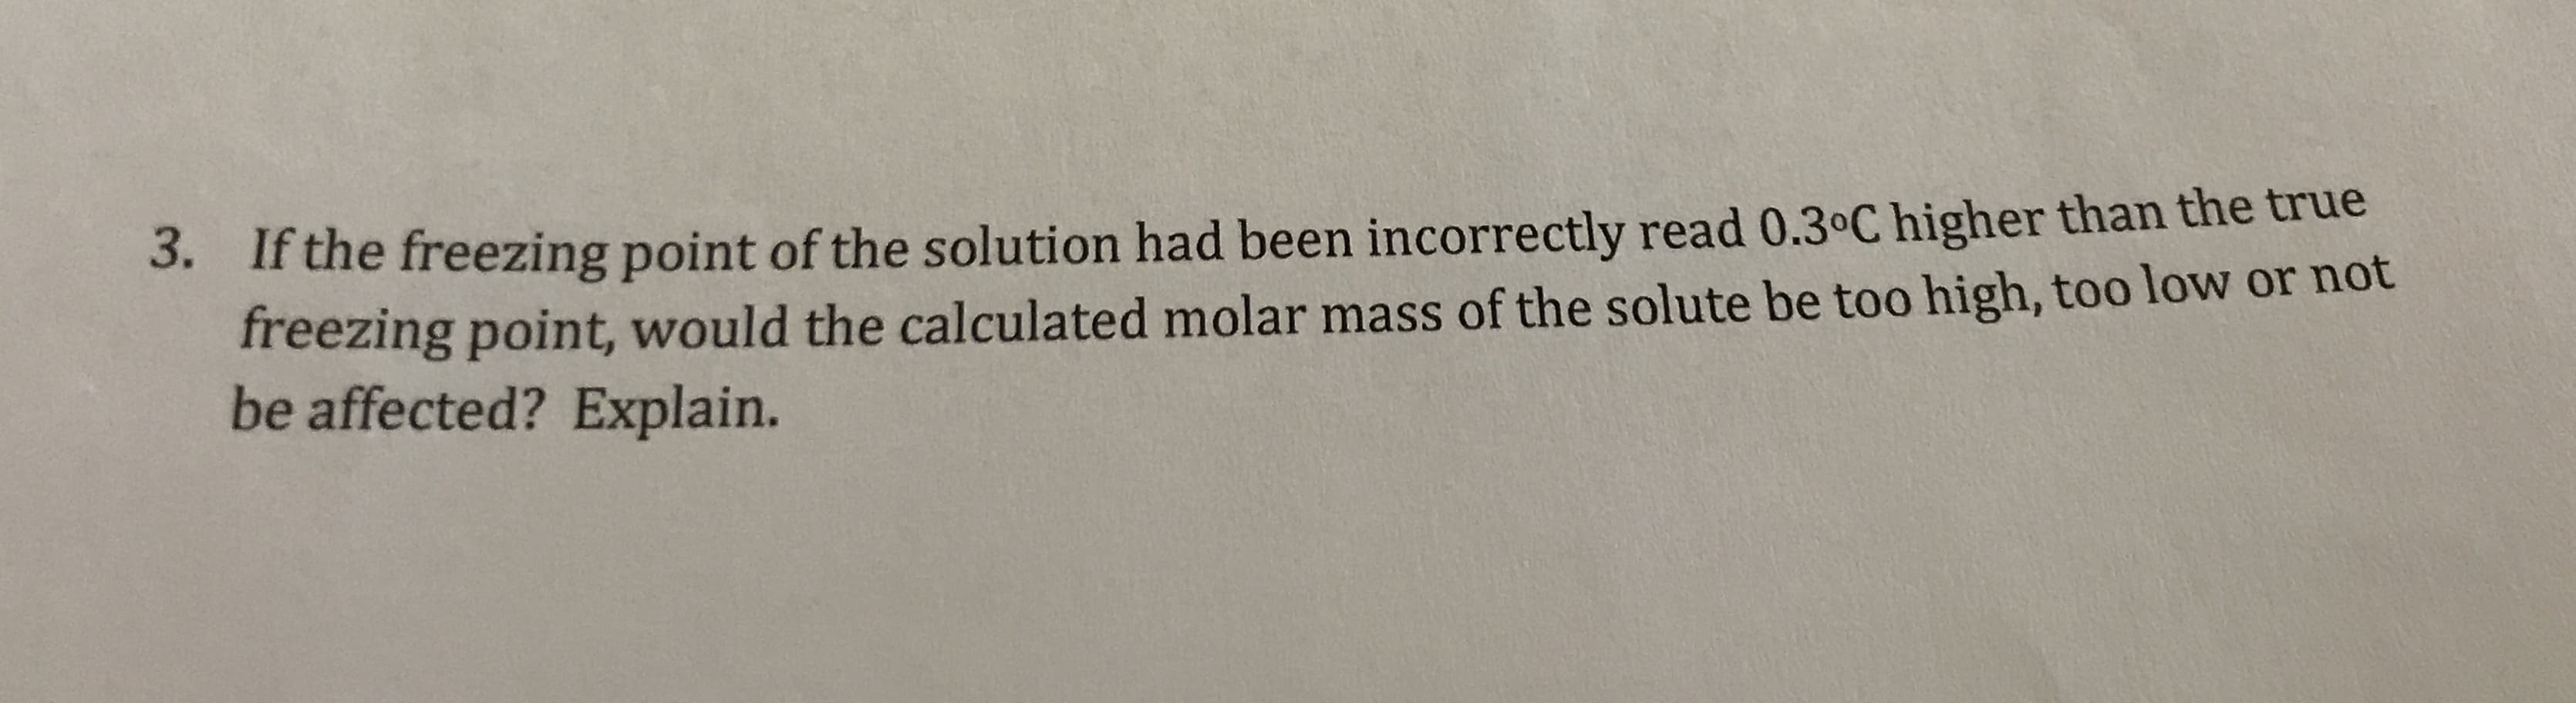 3. Ifthe freezing point of the solution had been incorrectly read 0.30C higher than the true
freezing point, would the calculated molar mass of the solute be too high, too low or not
be affected? Explain.
